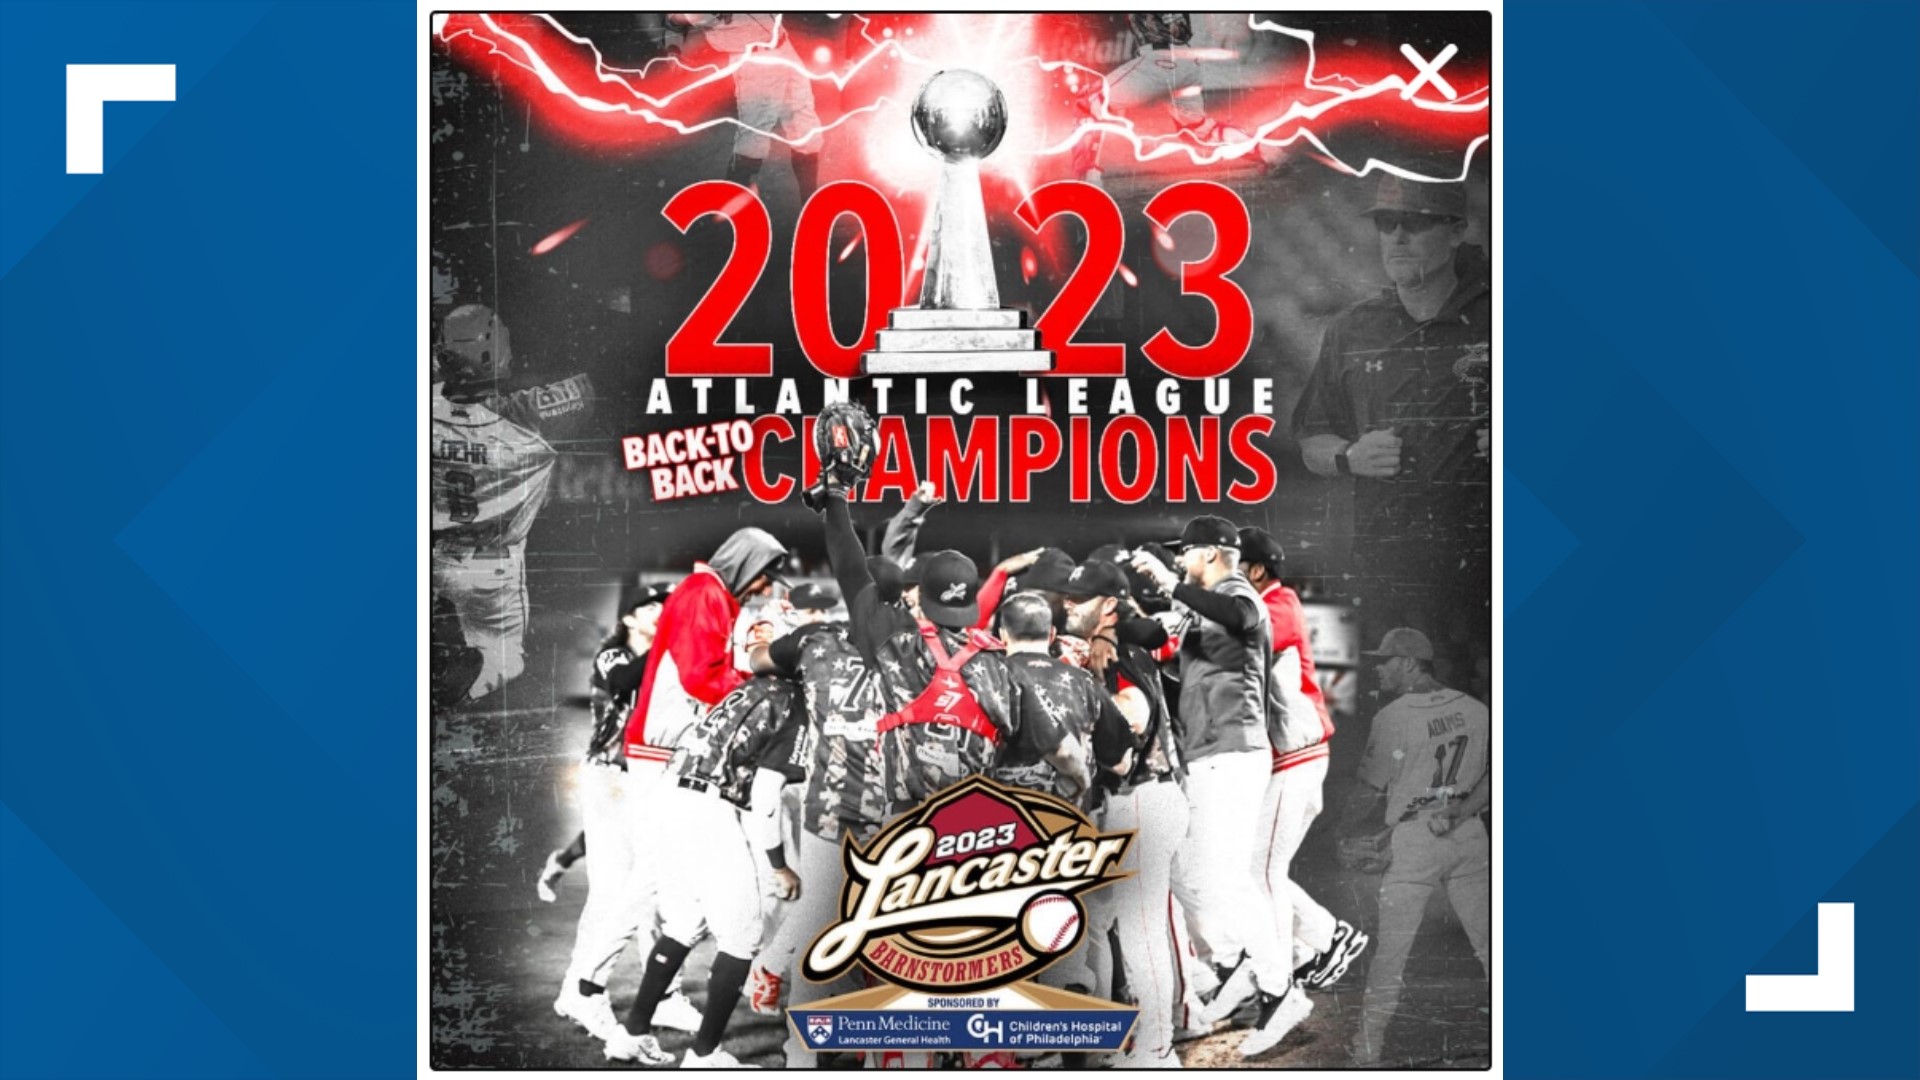 The Barnstormers claimed their fourth Atlantic League title and are excited about the chance at a three-peat.